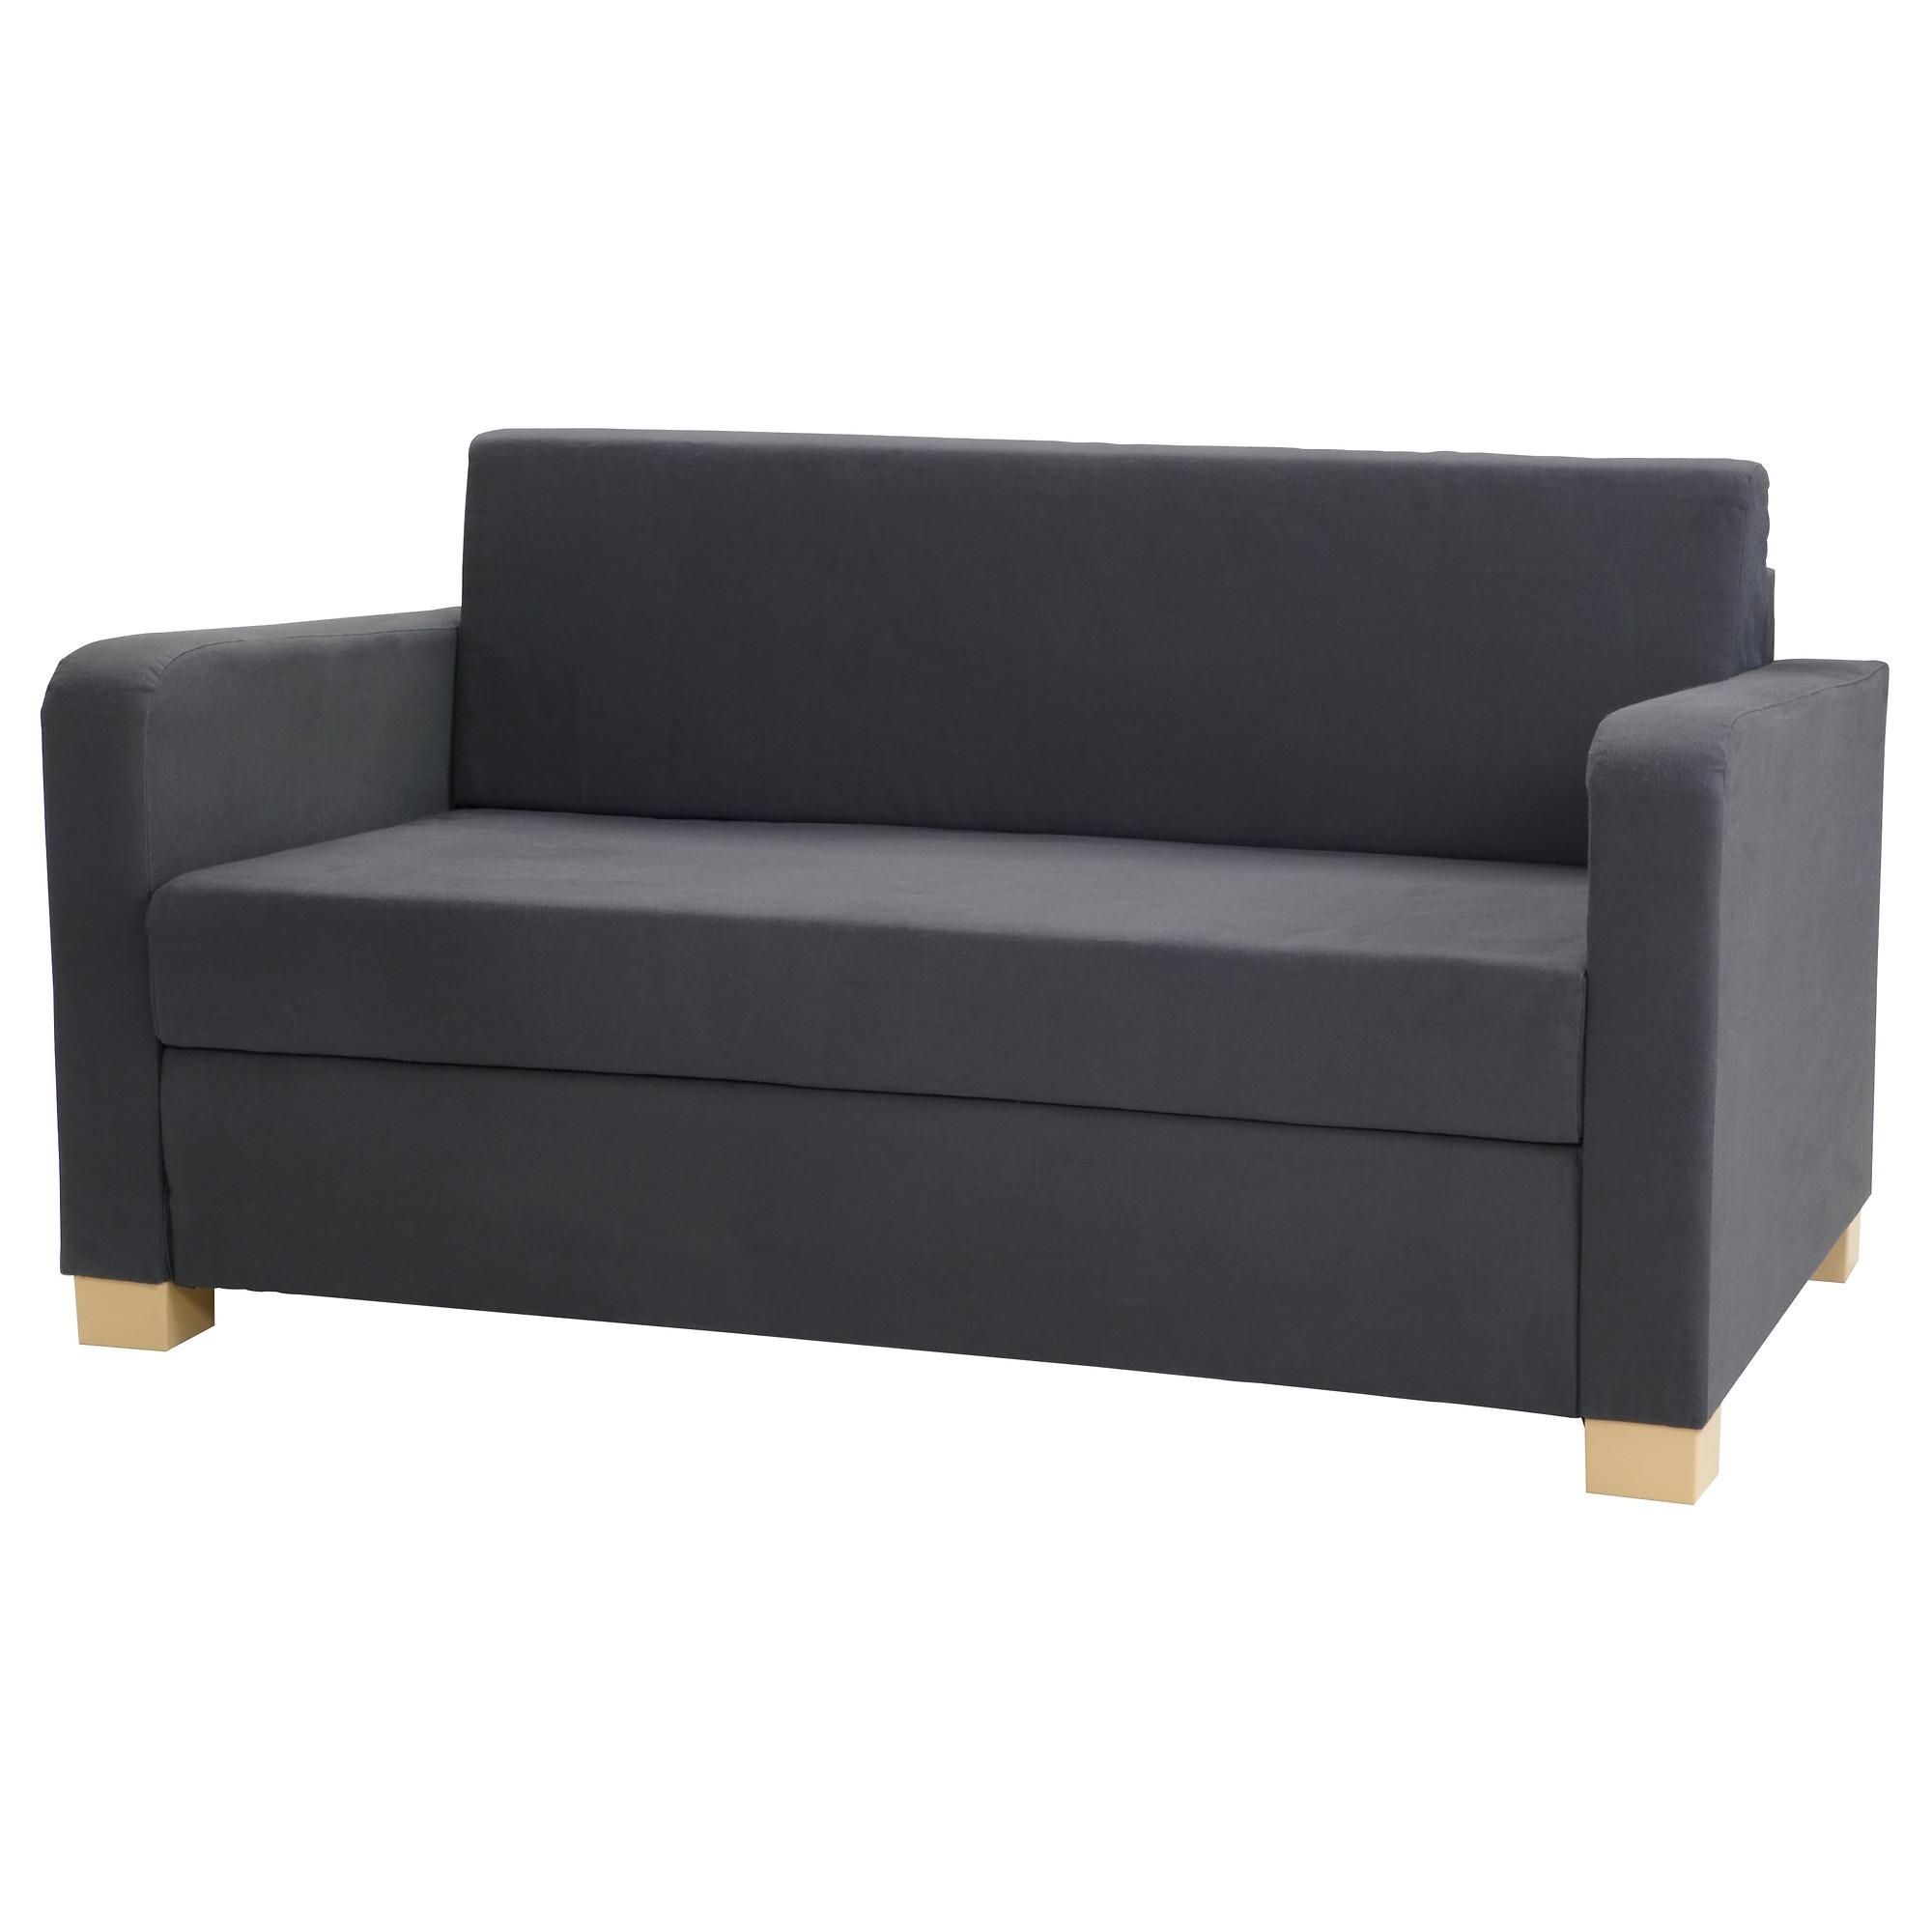 Sleeper Sofas & Chair Beds – Ikea Intended For Sofa Beds Chairs (View 17 of 20)